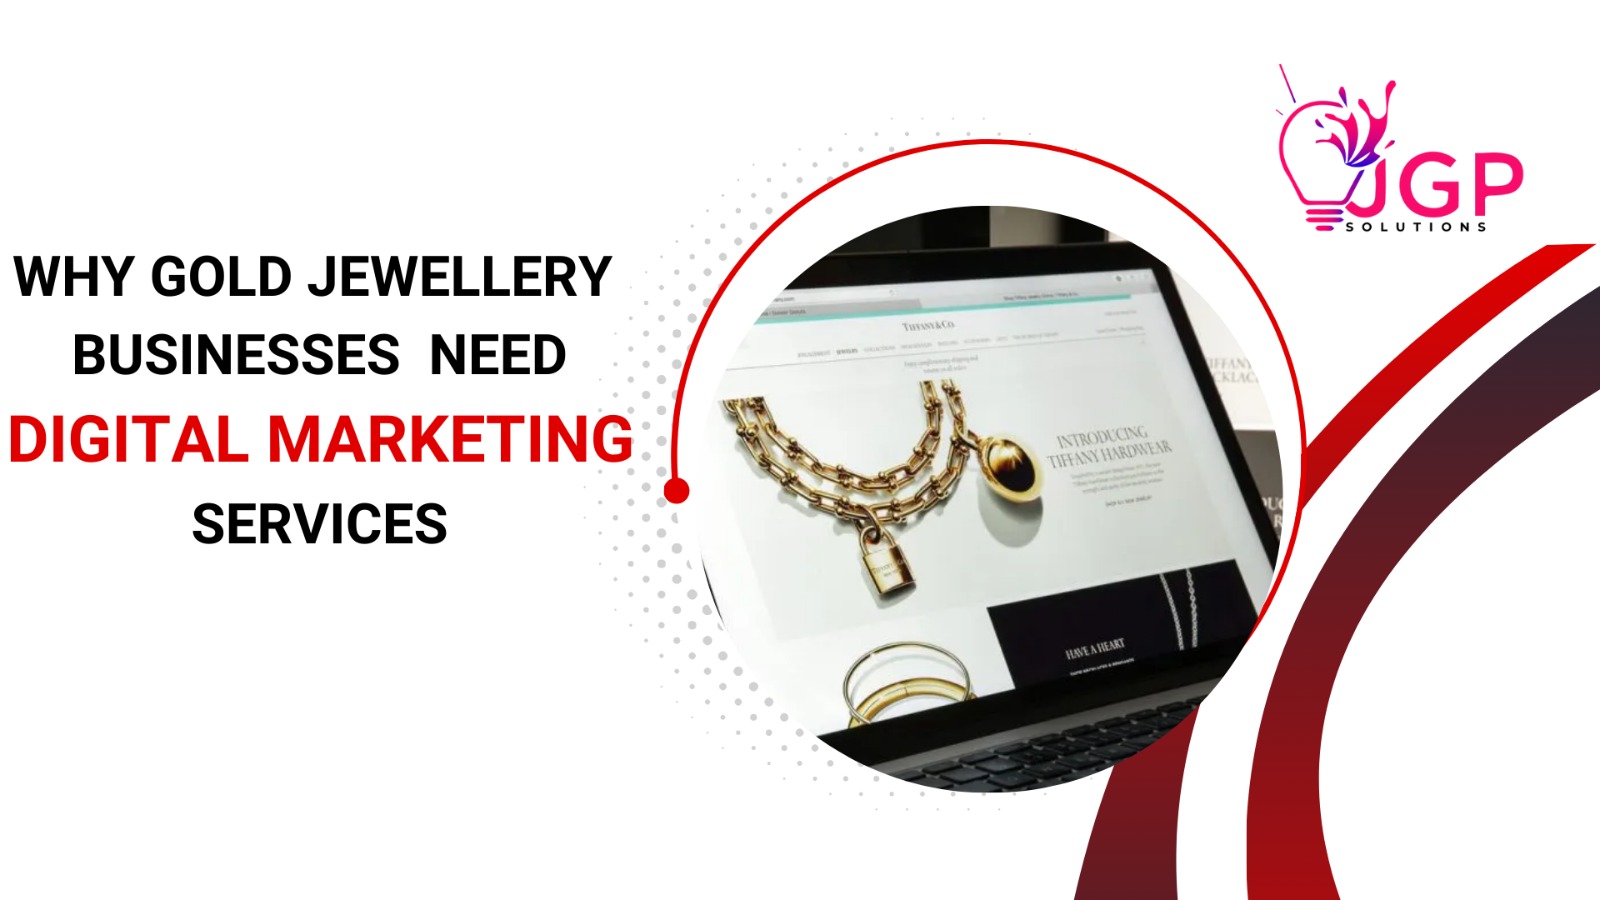 Why Gold Jewellery Businesses Need Digital Marketing Services